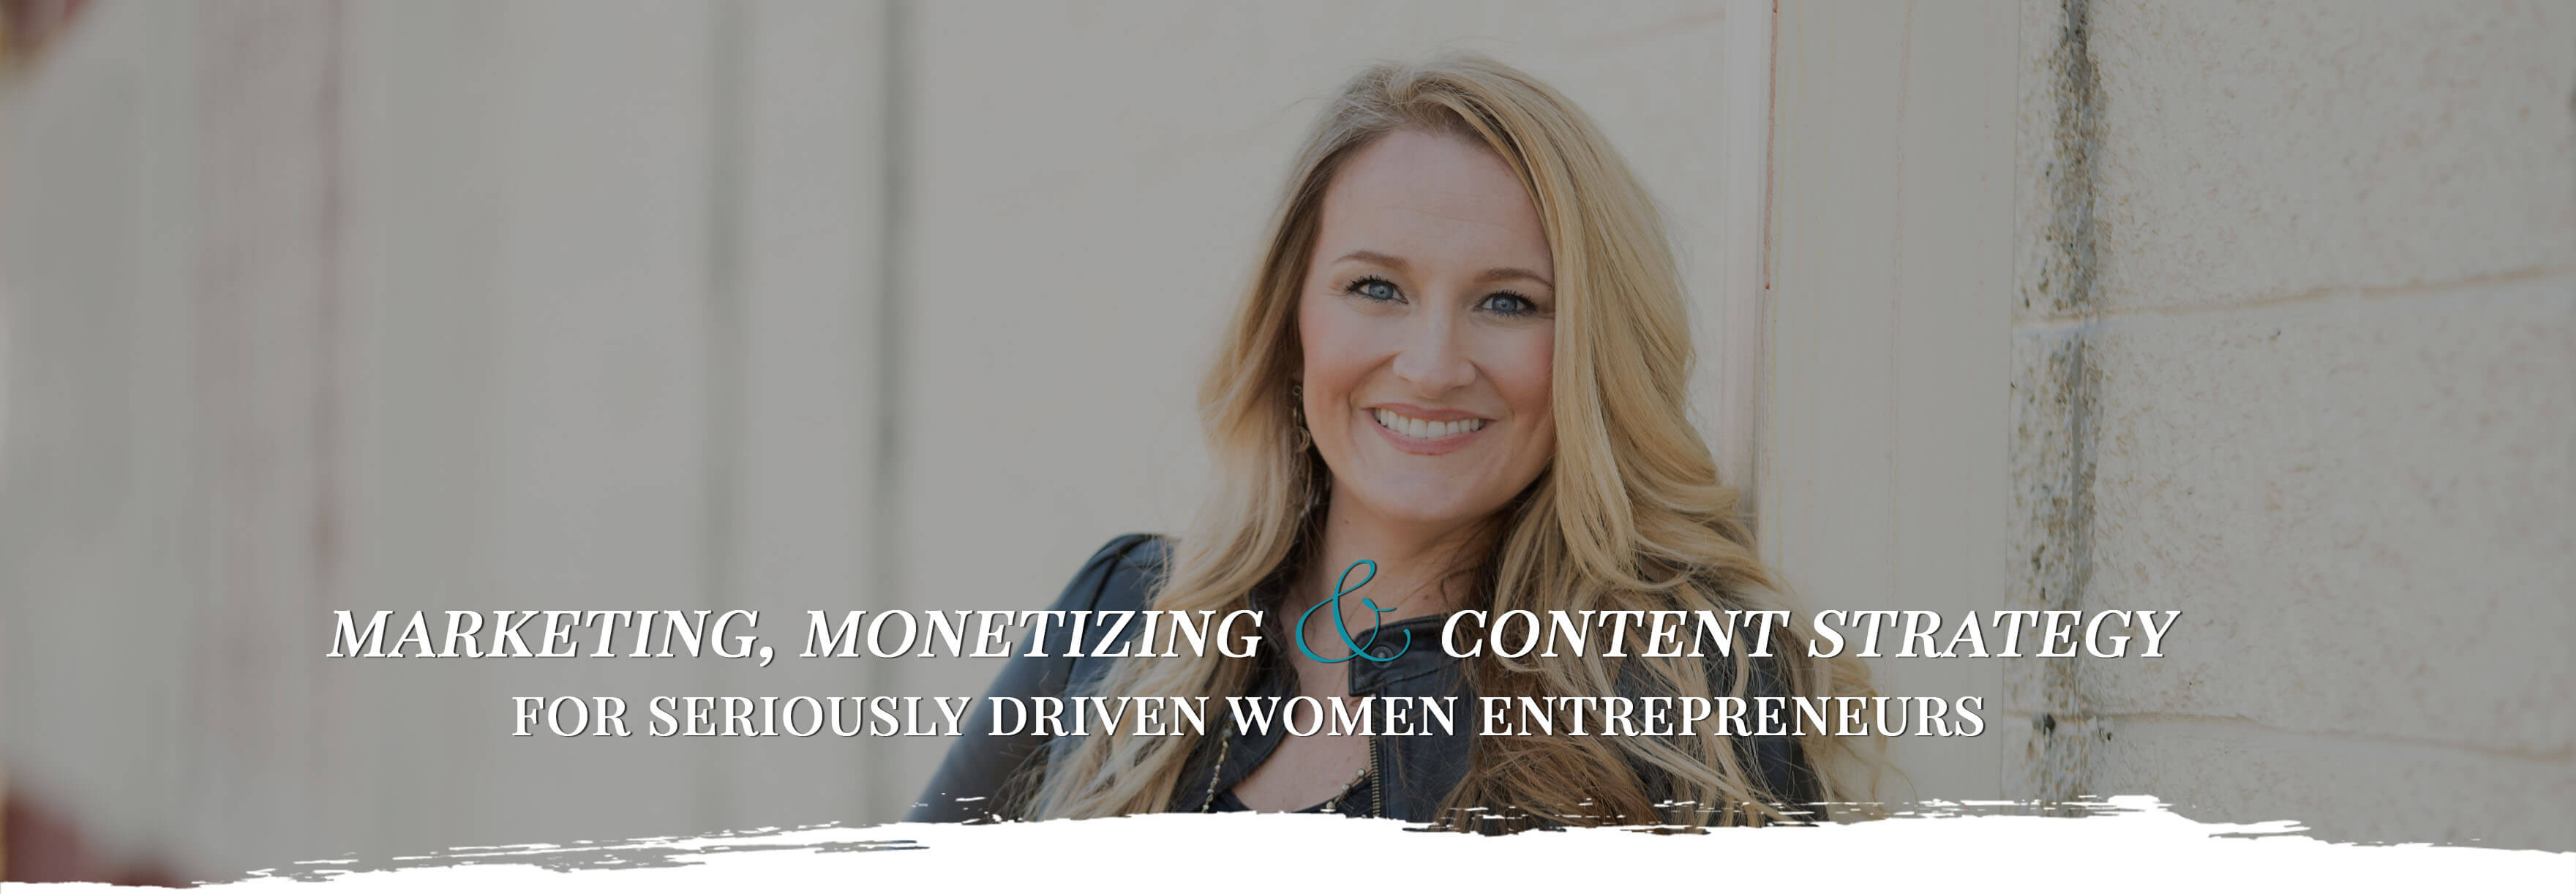 marketing, monetizing and content strategy for seriously driven women entrepreneurs 